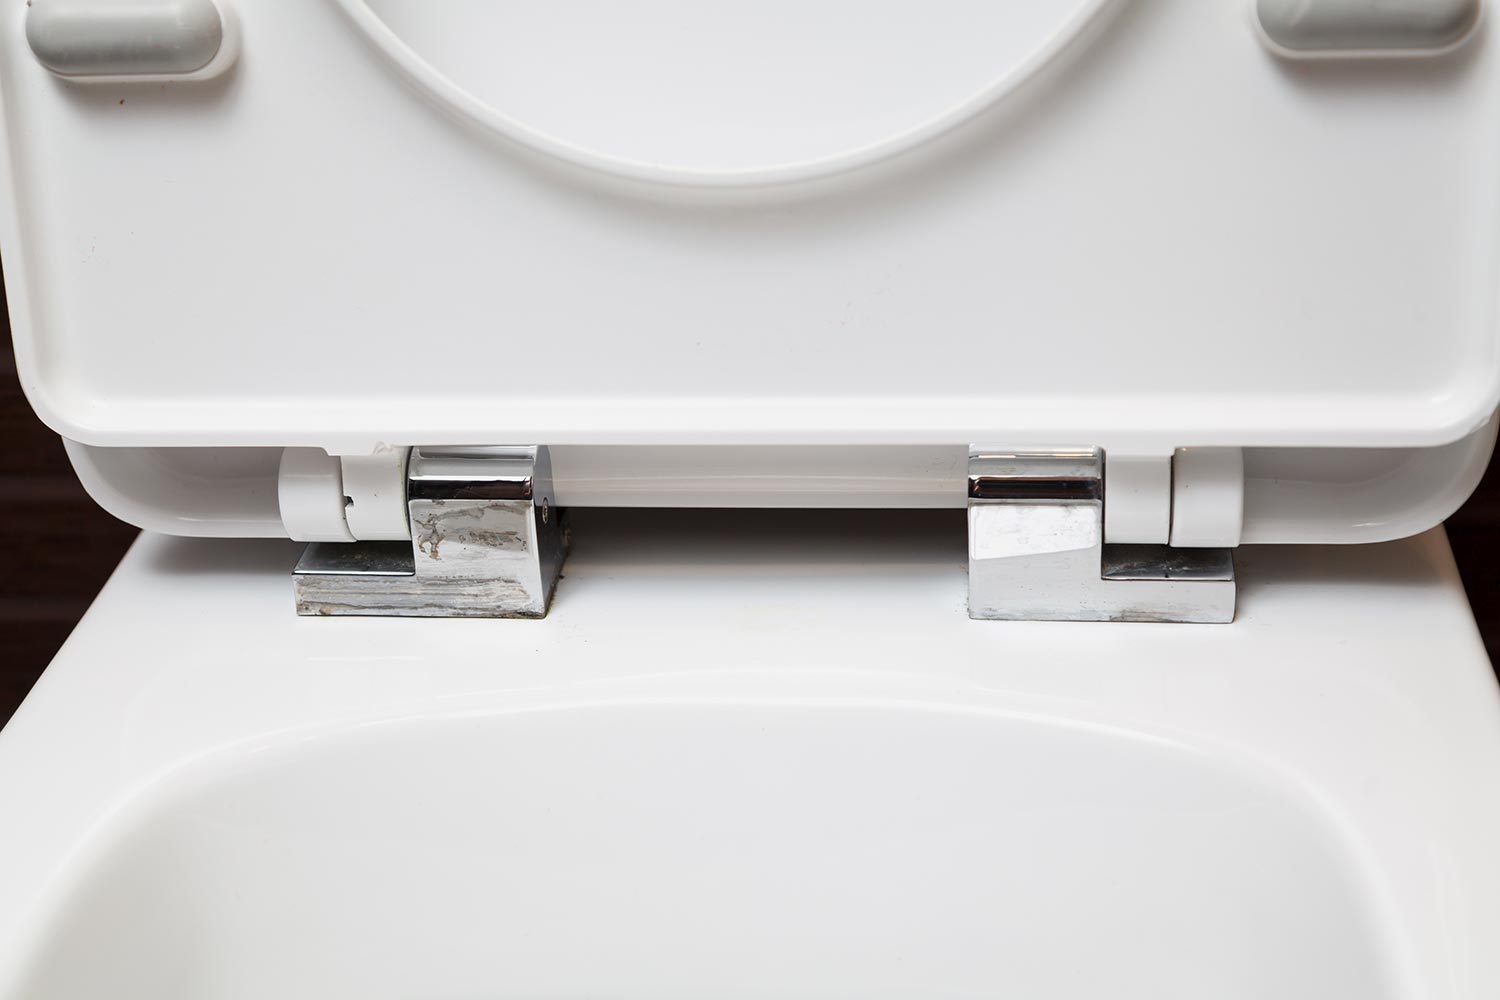 Seat and lid attachment system on modern toilet